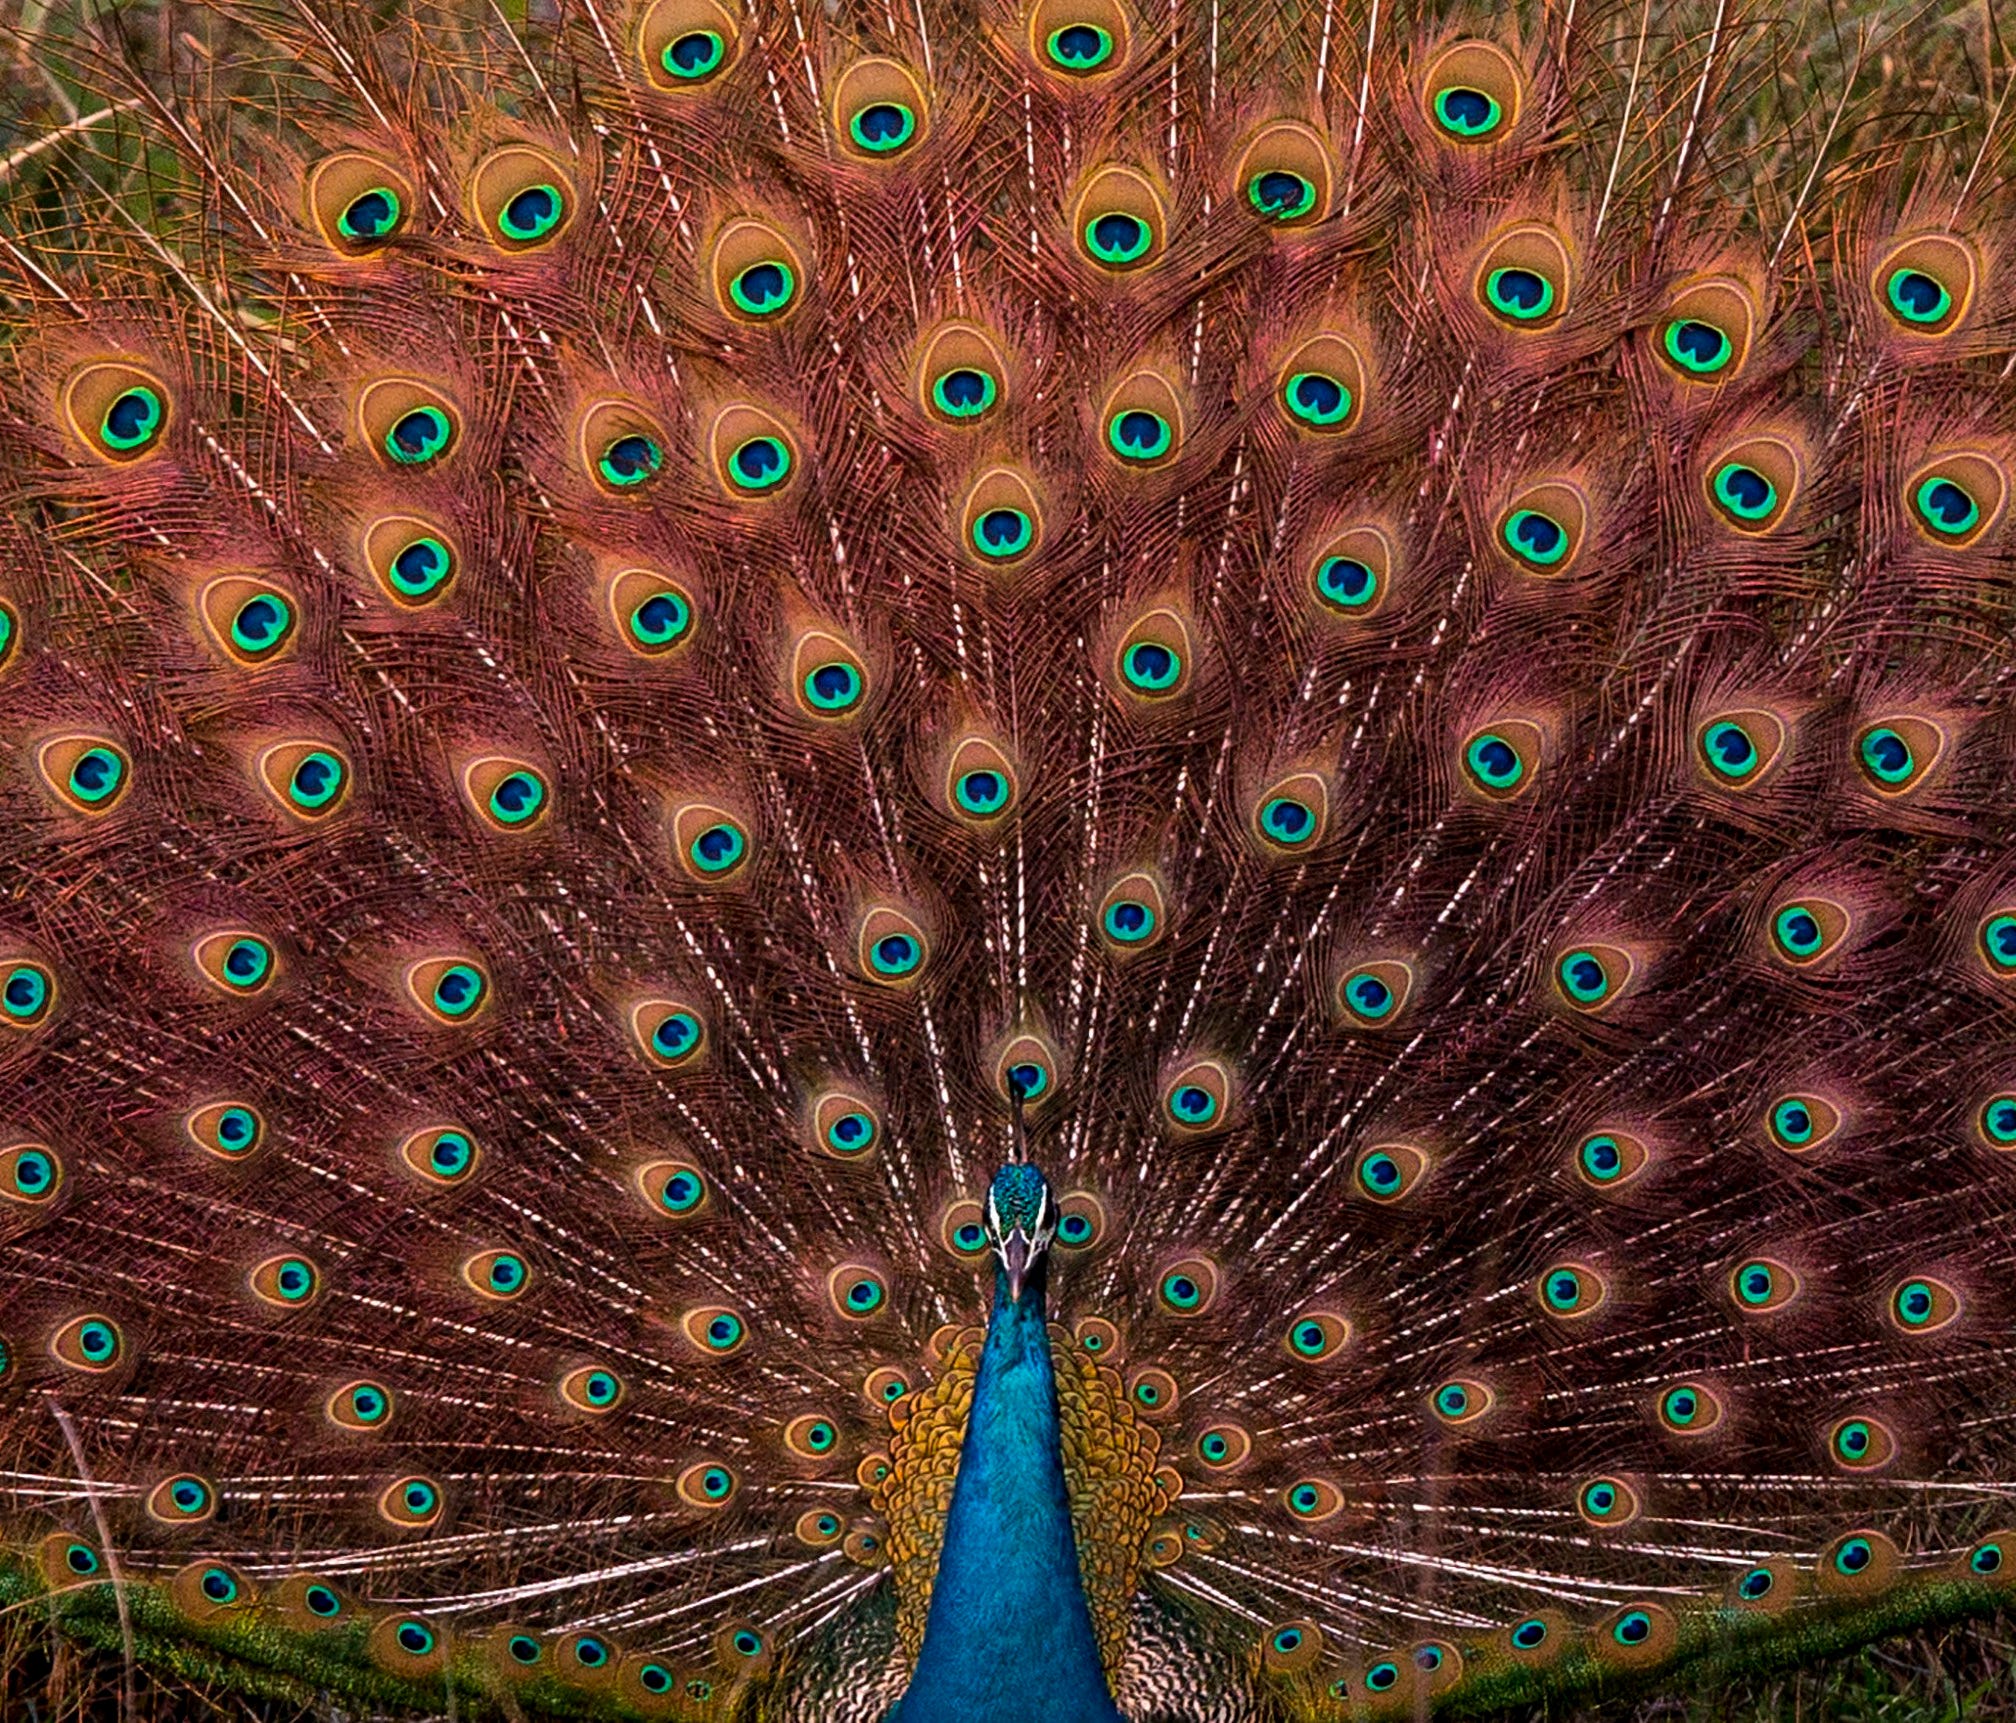 A peacock spreads its feathers at Chitwan National Park, in Chitwan district, Nepal, Dec. 25, 2017.